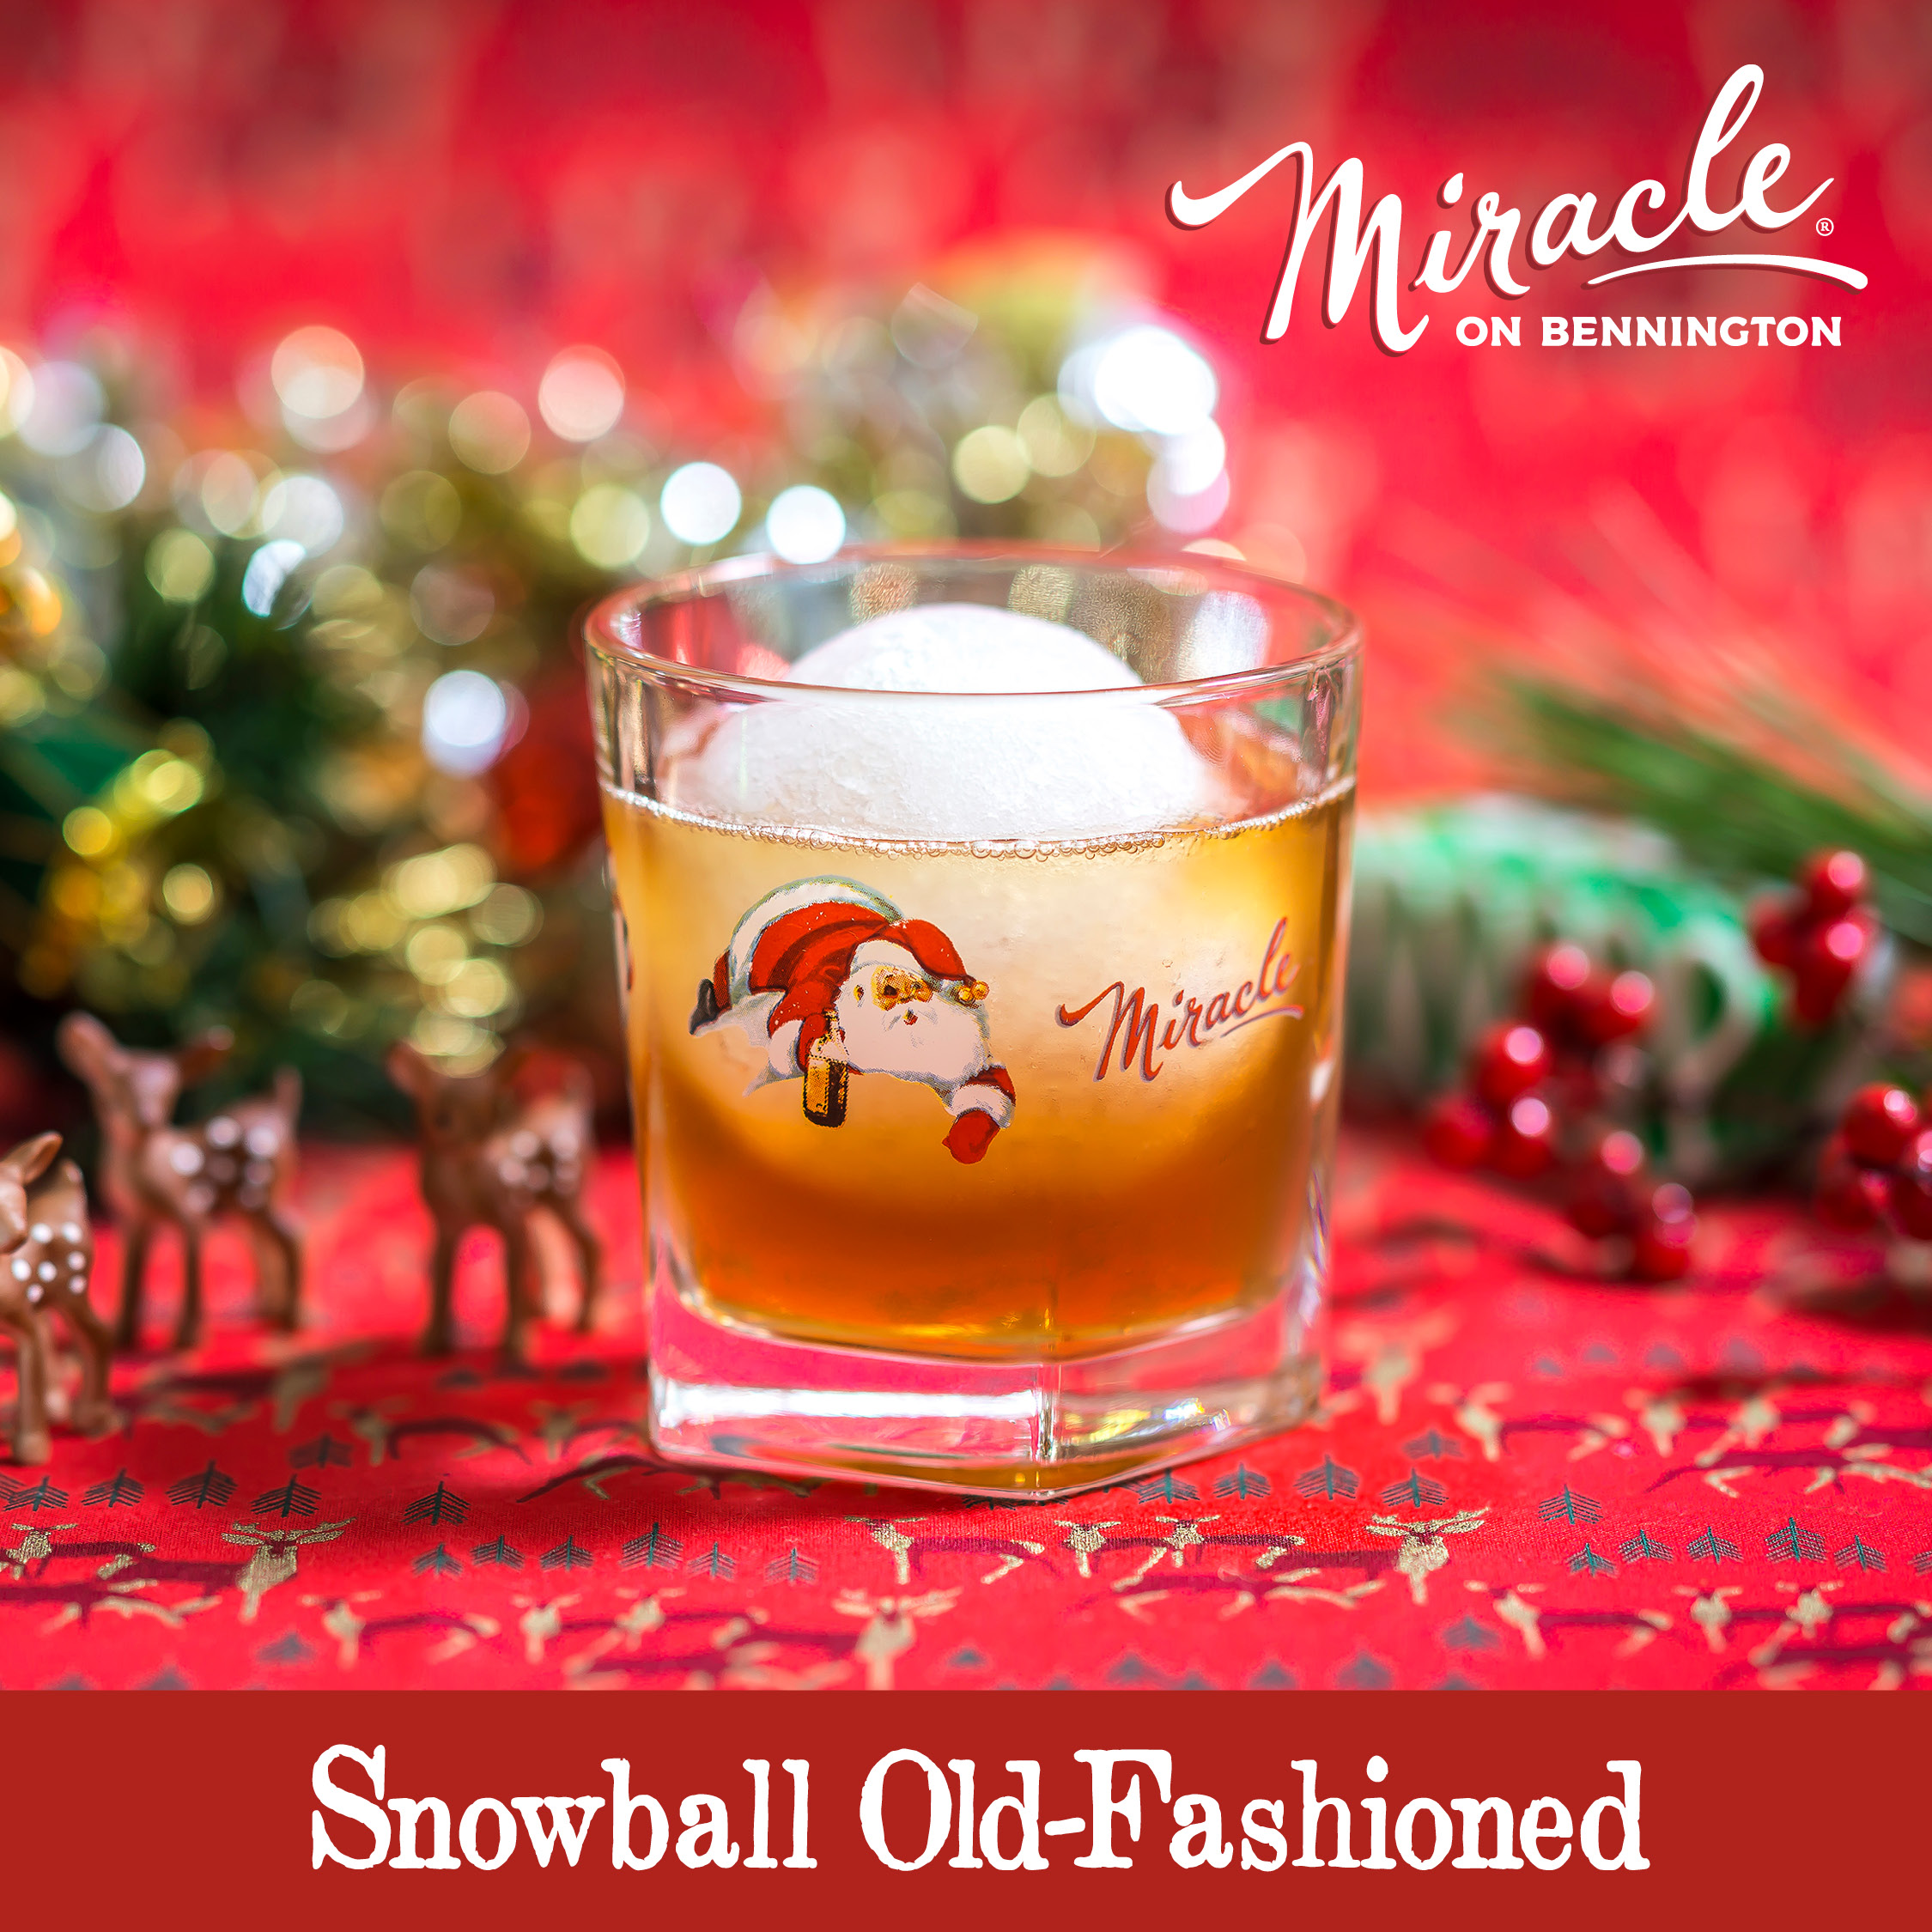 Snowball Old-Fashioned